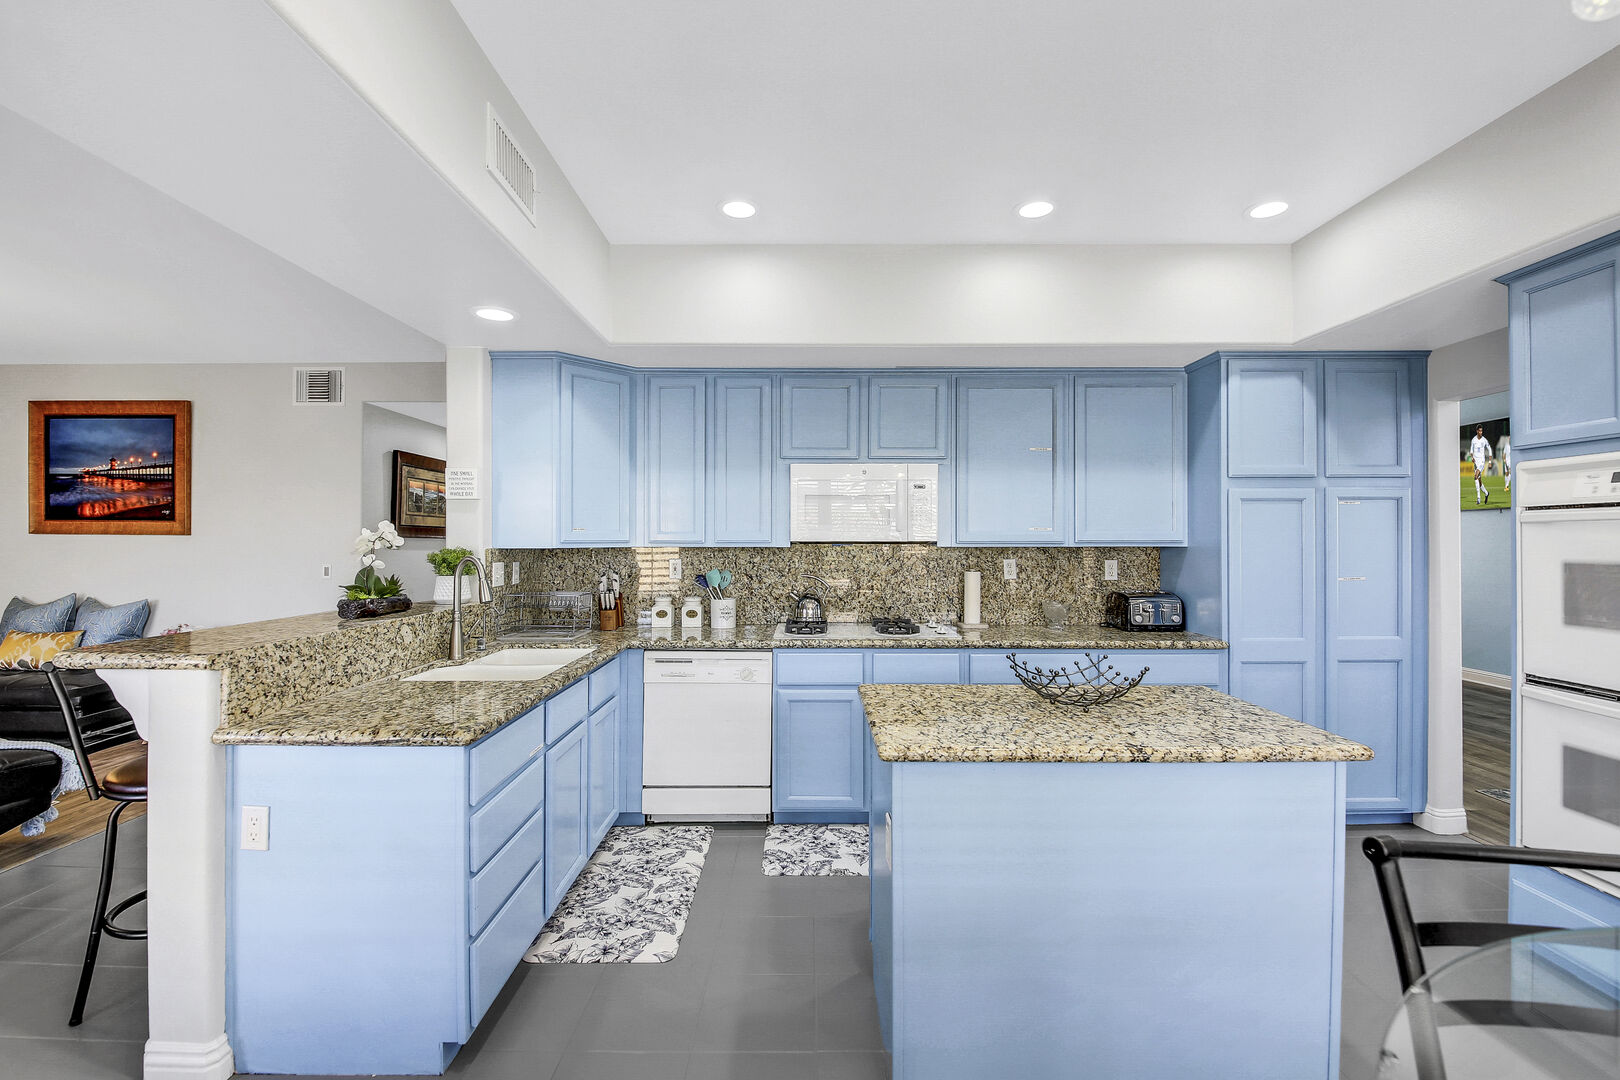 This family kitchen offers everything one would need to create their perfect meal including granite countertops.